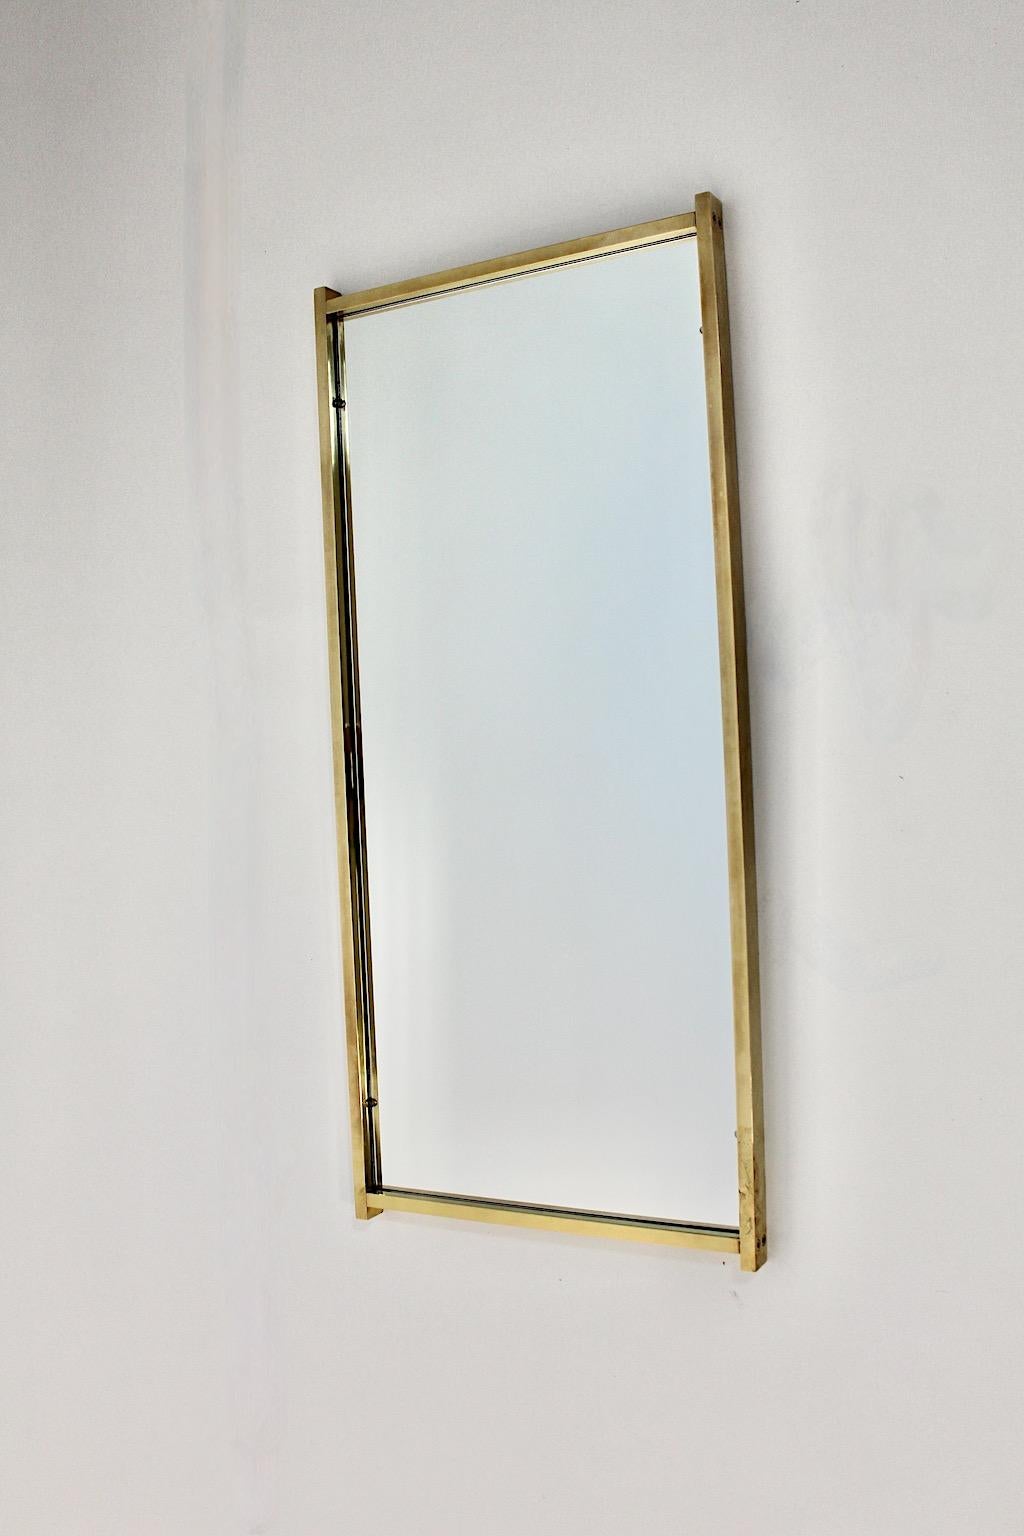 Modernist Vintage Rectangular Brass Wall Mirror Floor Mirror 1970s Italy In Good Condition For Sale In Vienna, AT